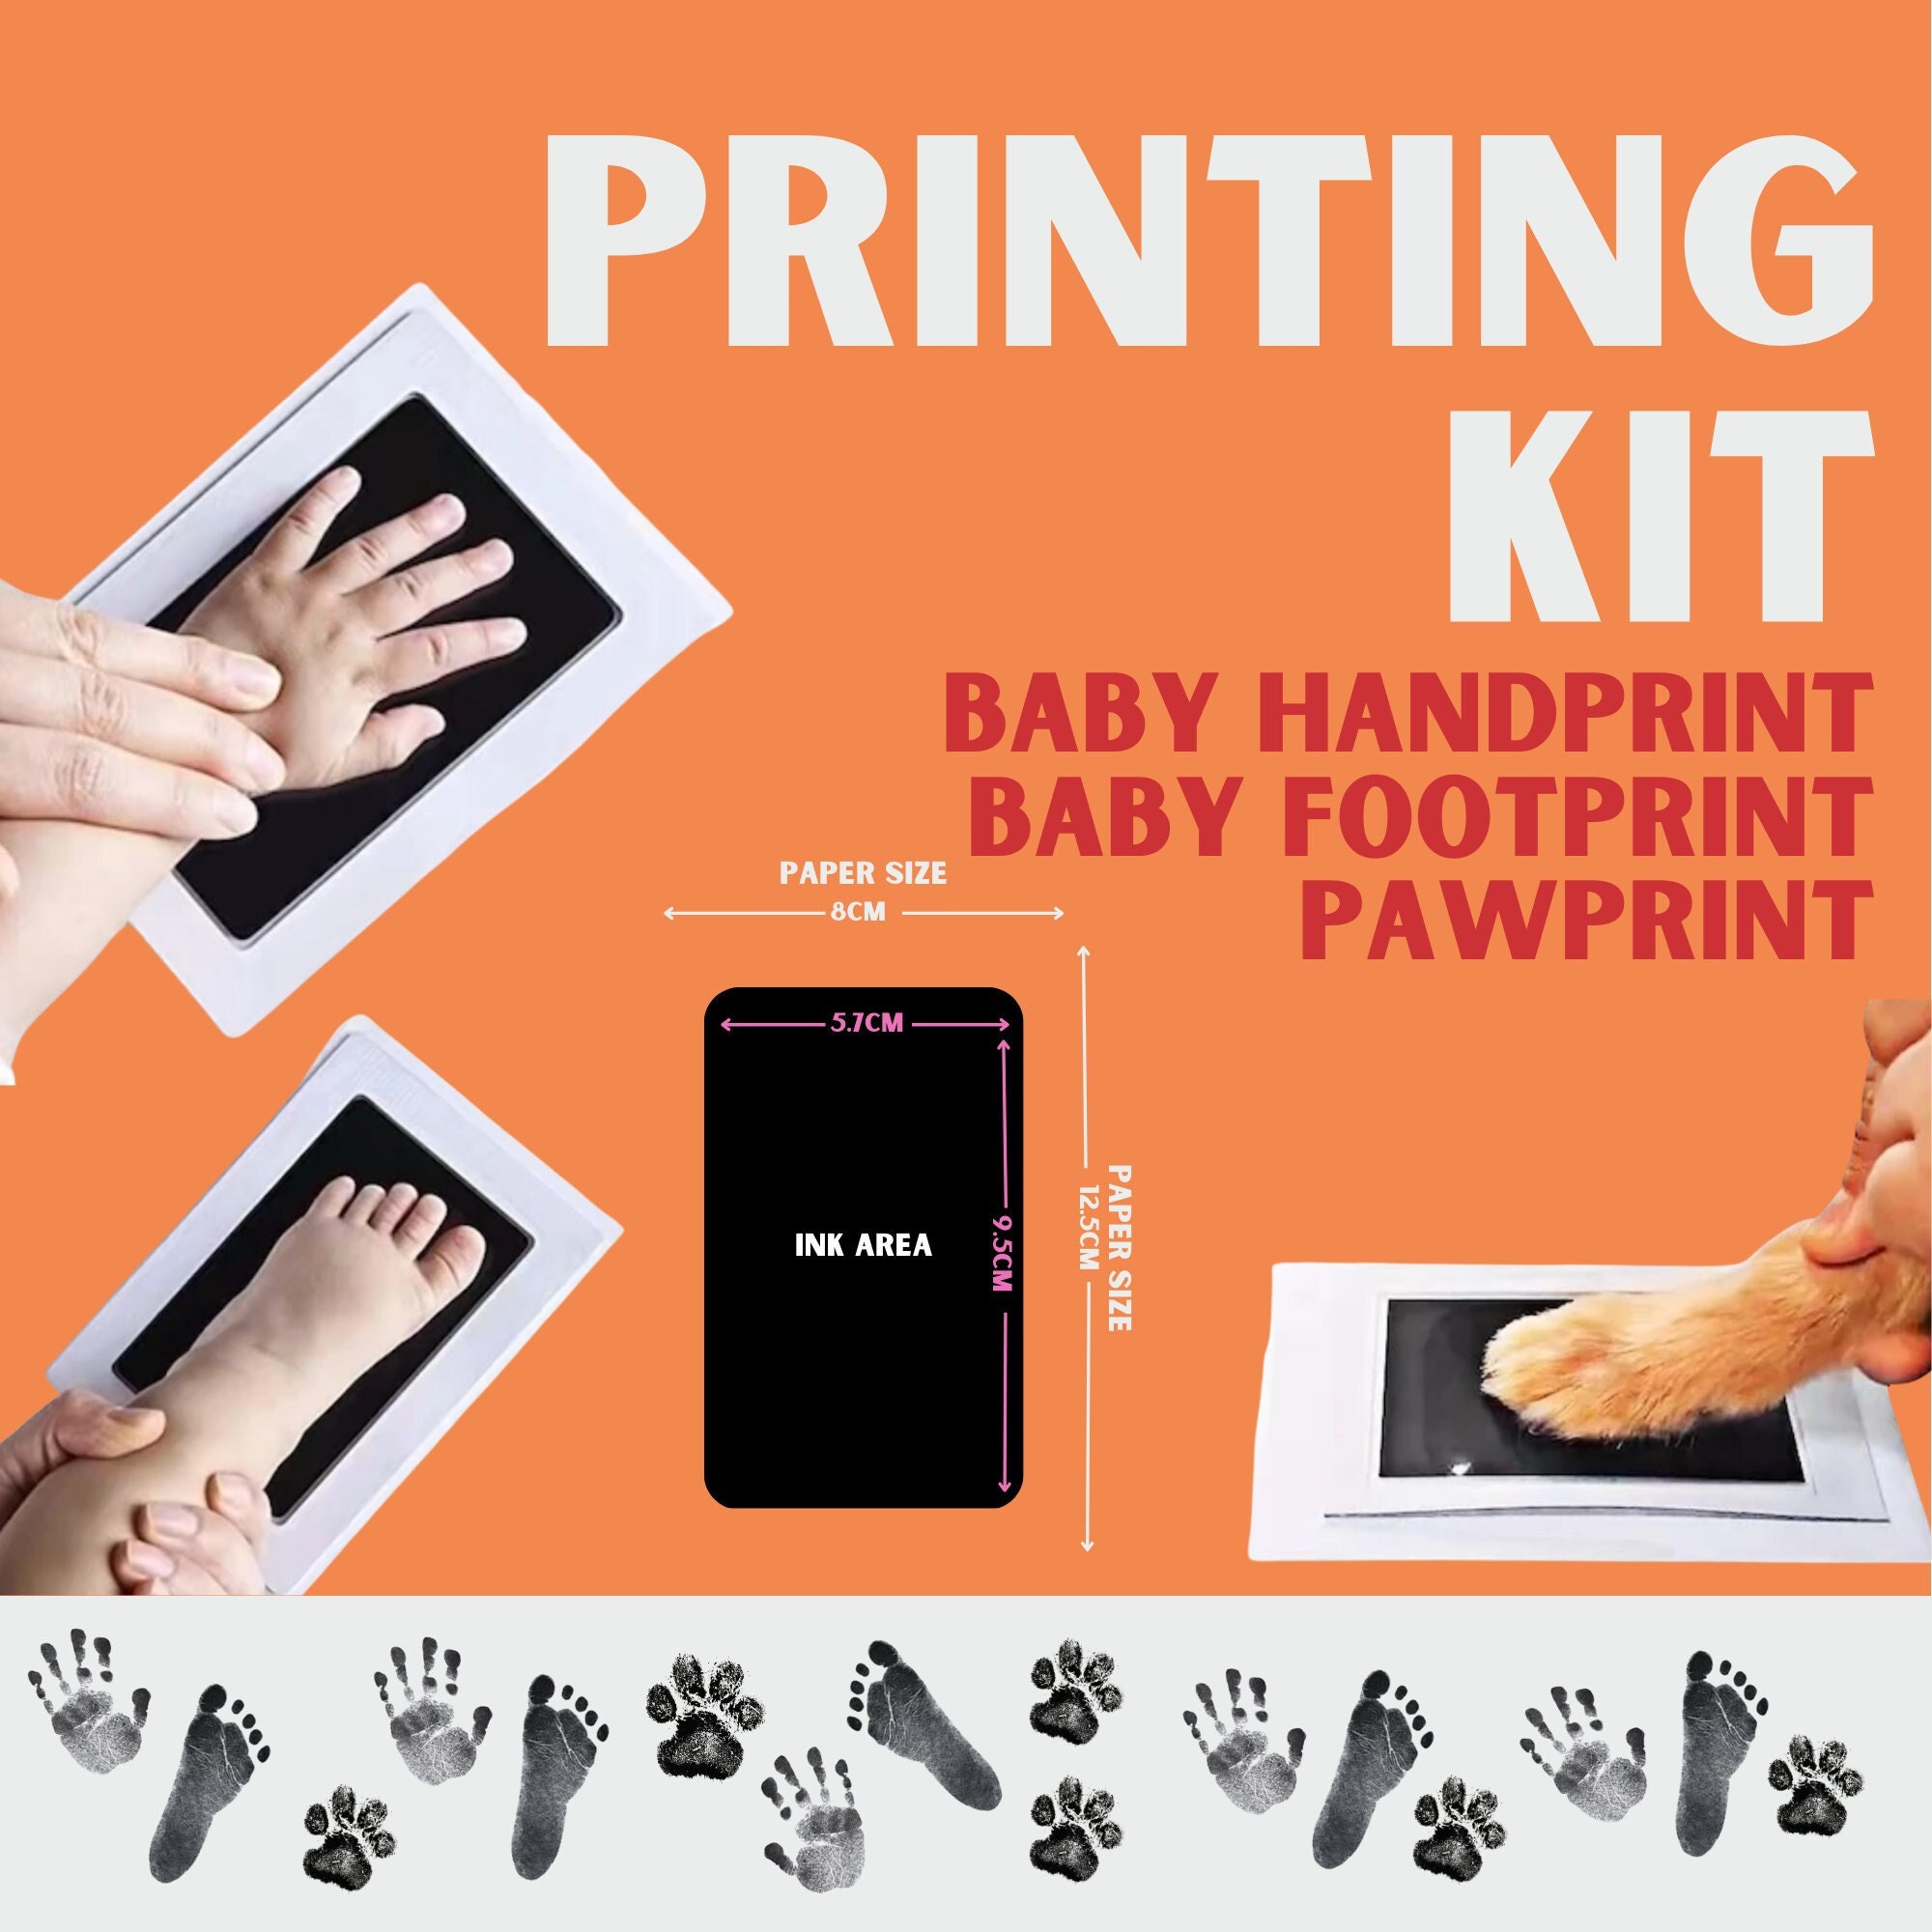 7 Washable Ink Pads for Rubber Stamps, Letter Stamps, Paw Print Stamp Pad  For Dogs, Baby Footprint, Fingerprint, Stamp Pads For Kids on Scrapbooking